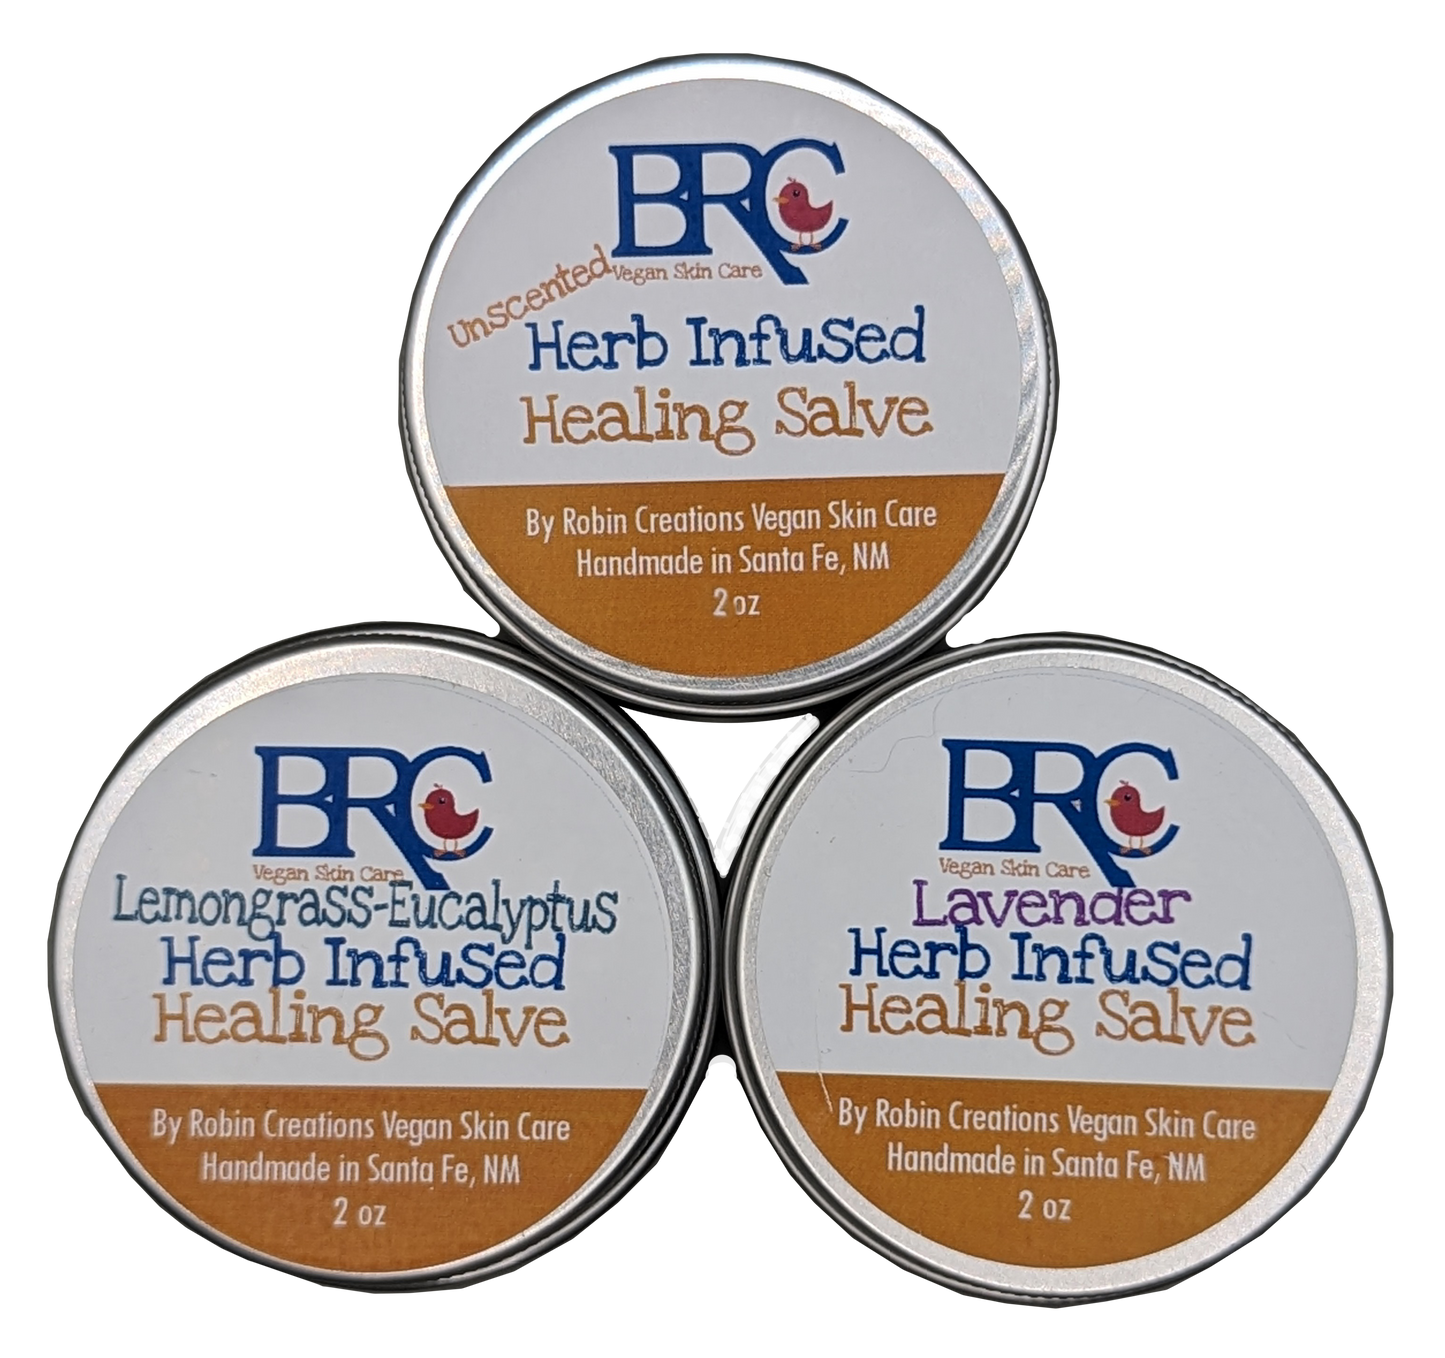 Herb-Infused Healing Salve - First Aid Balm